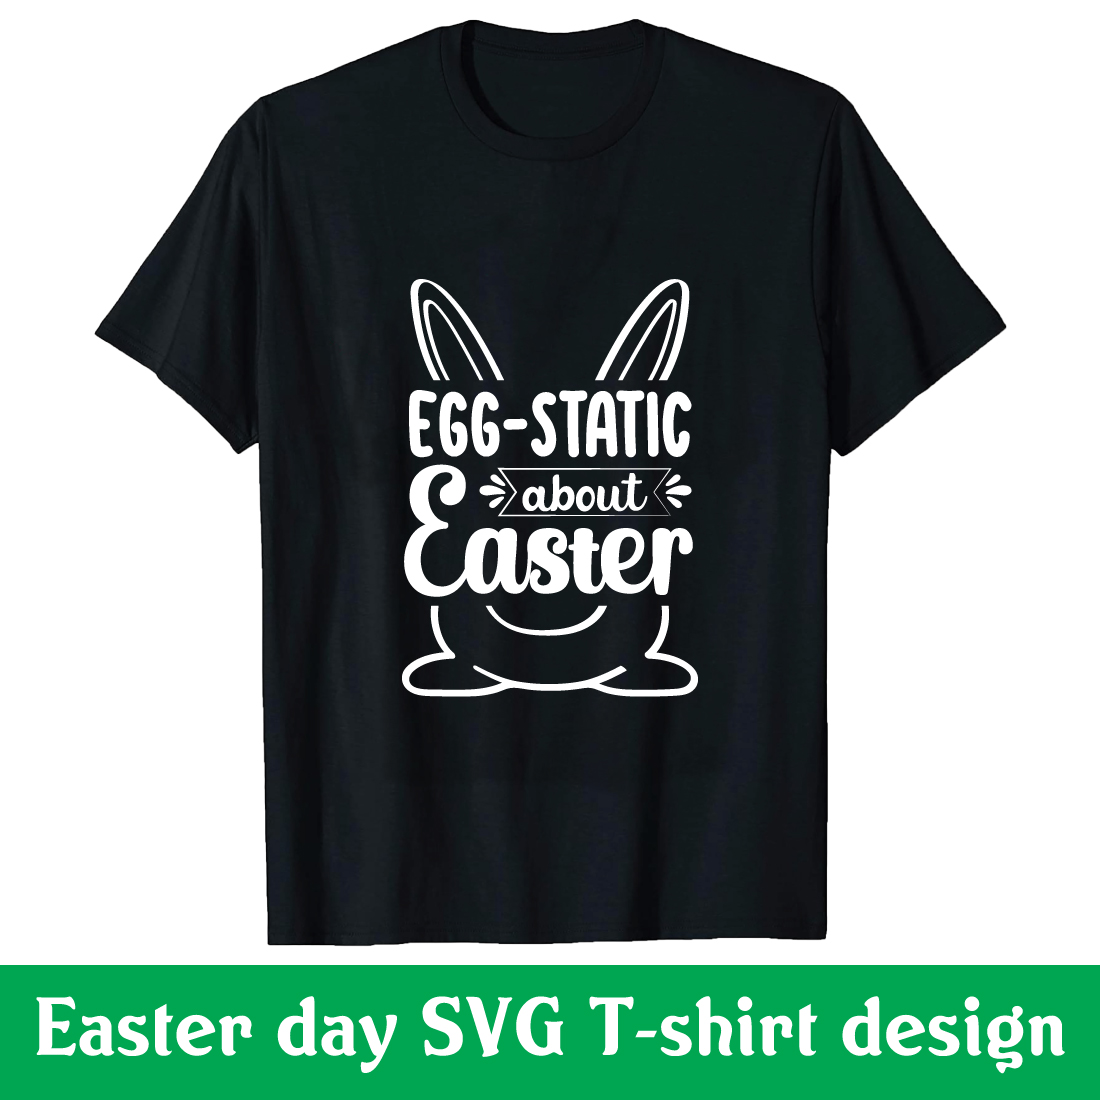 Egg static about Easter T-shirt design cover image.